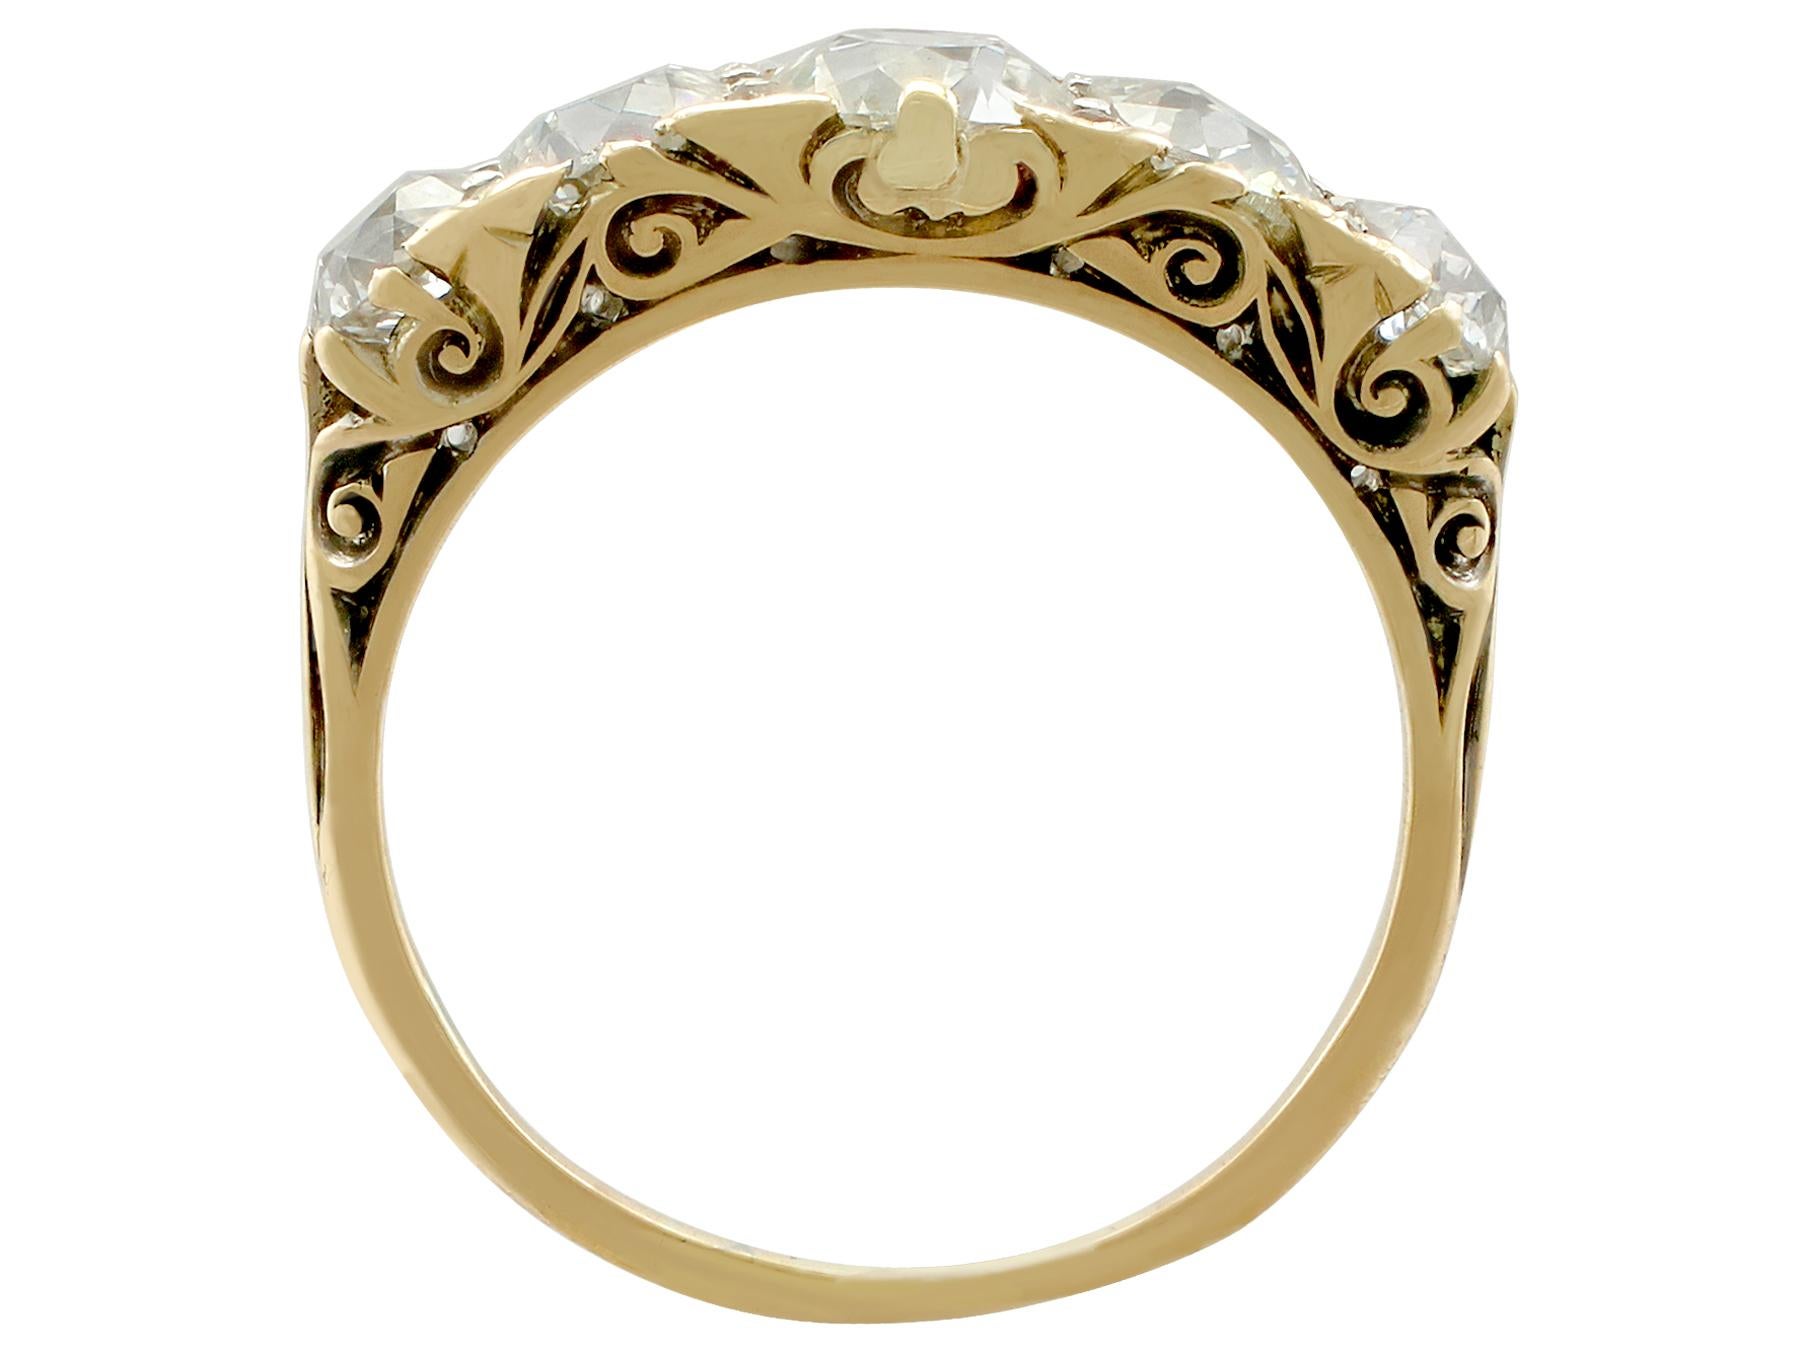 1900s Antique 2.44 Carat Diamond and Yellow Gold Five-Stone Ring 1